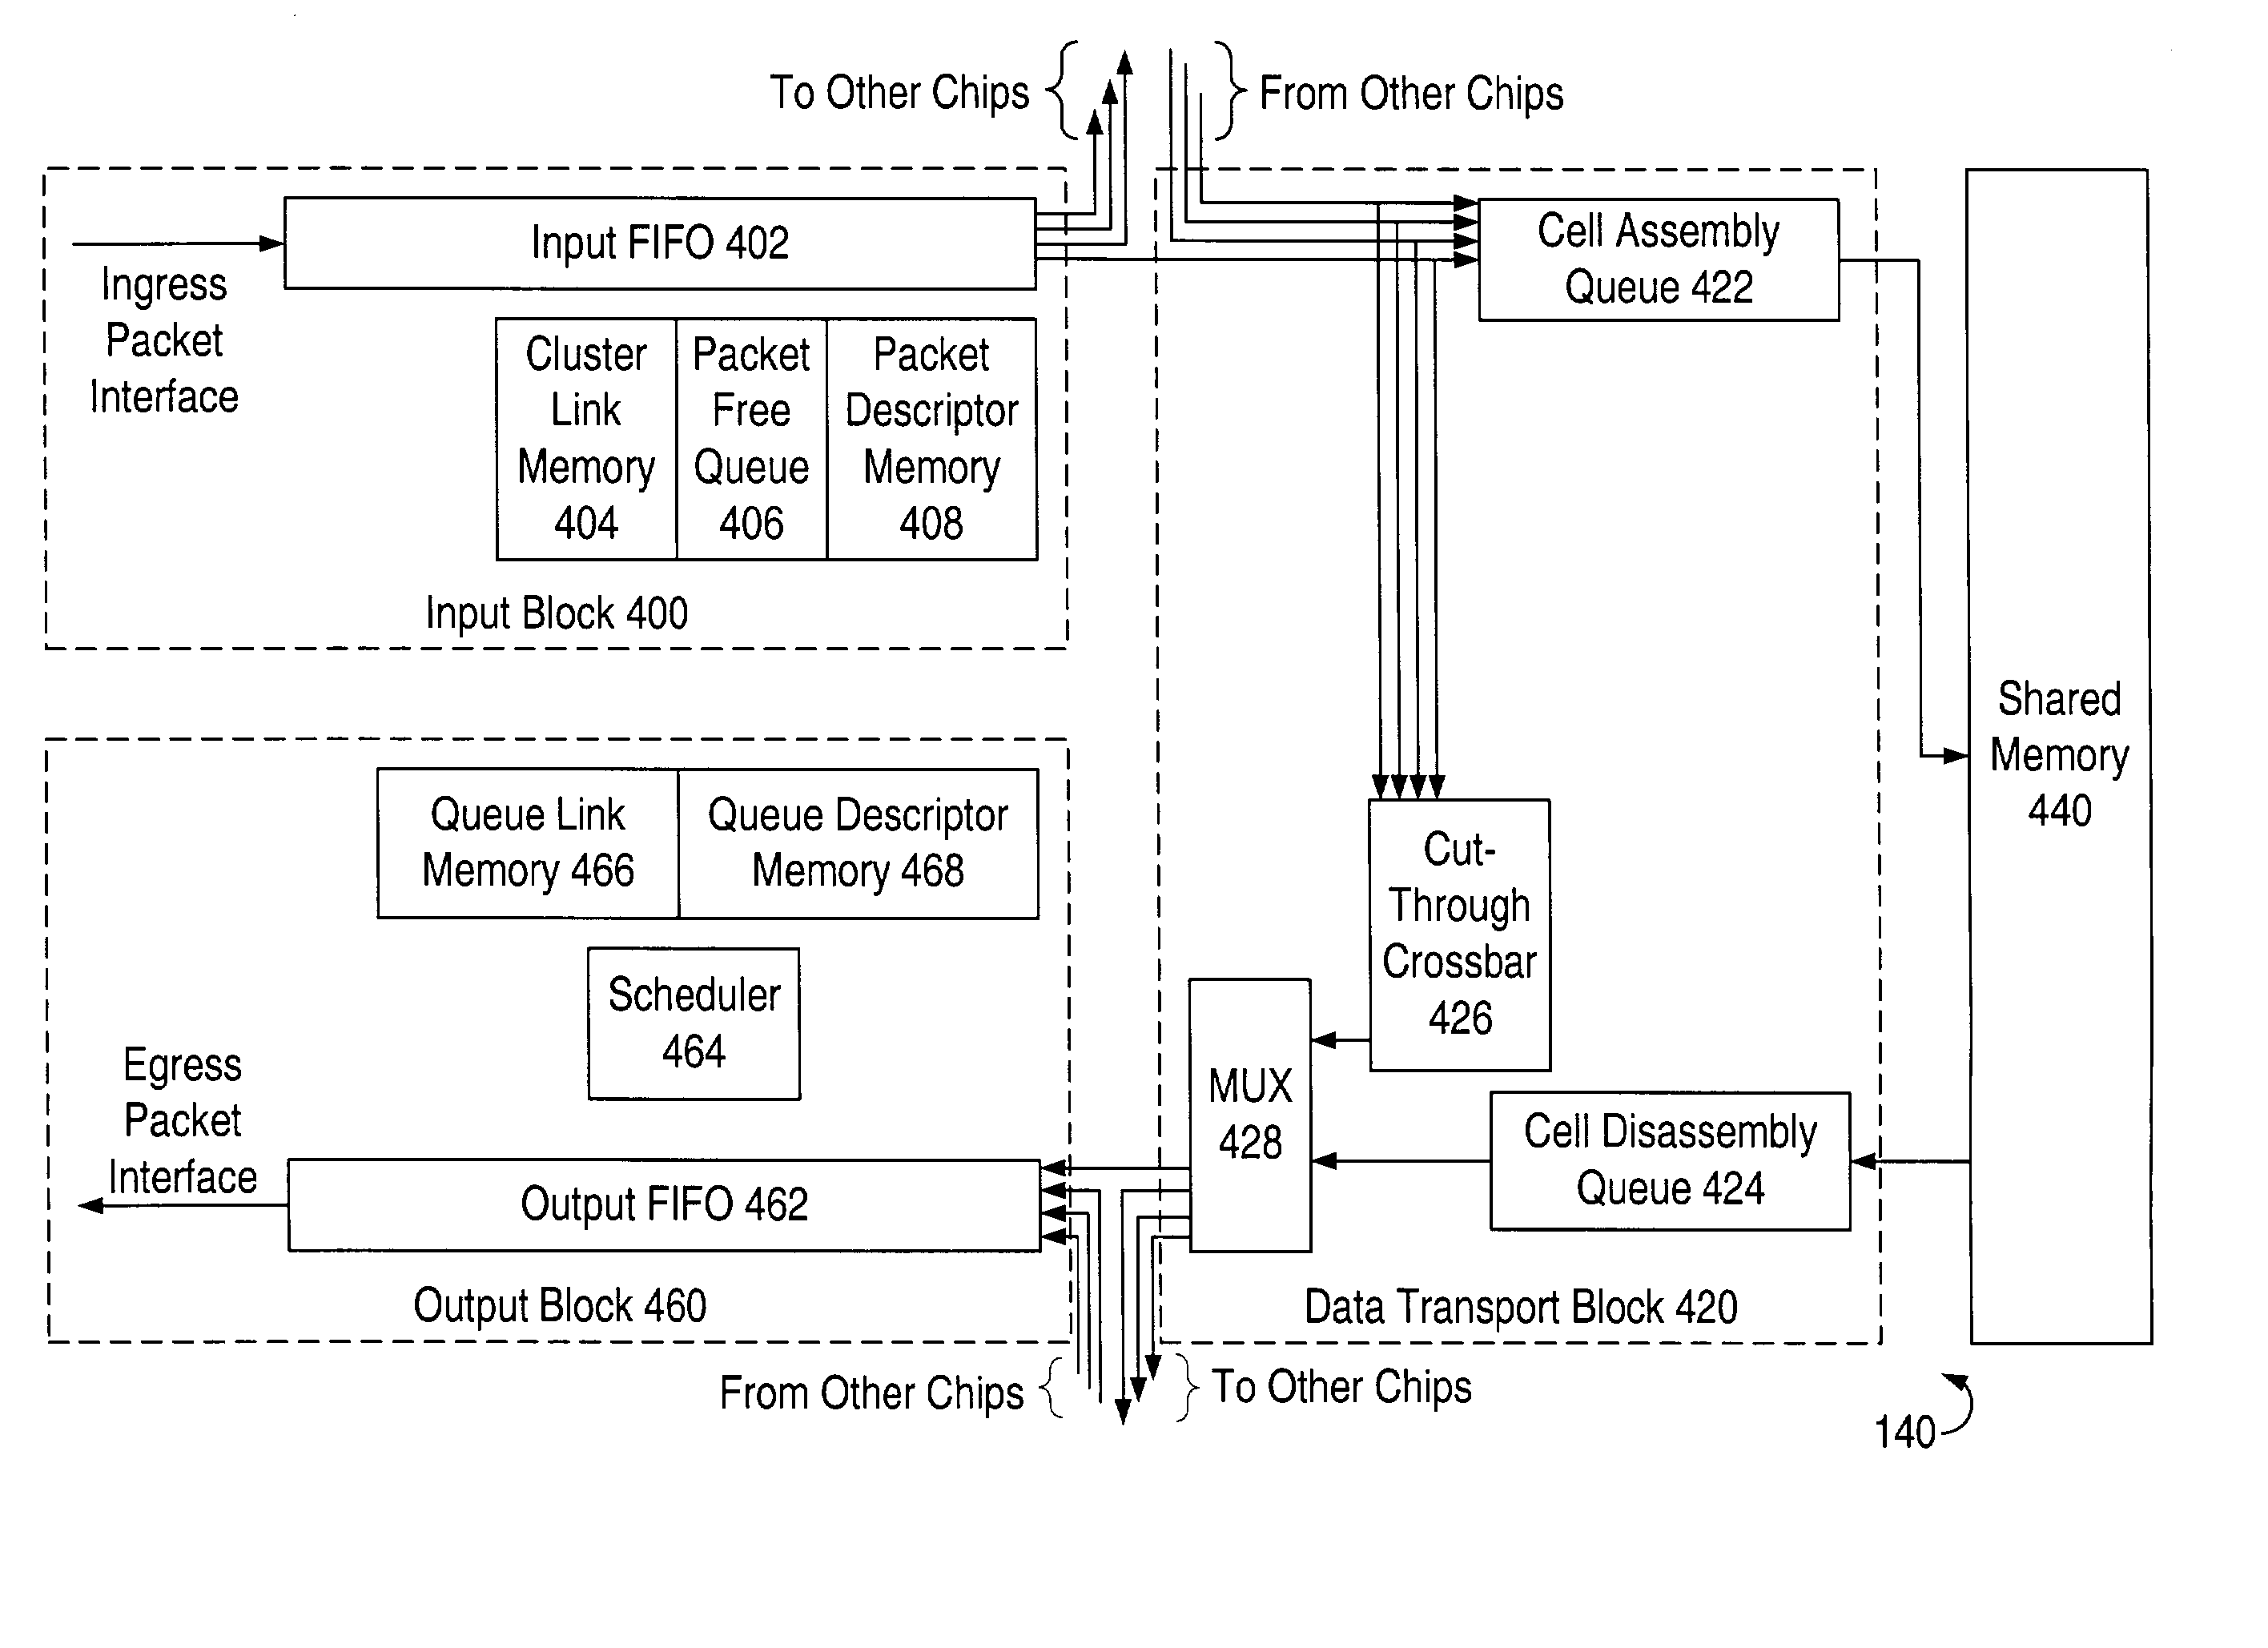 Method and system for managing time division multiplexing (TDM) timeslots in a network switch